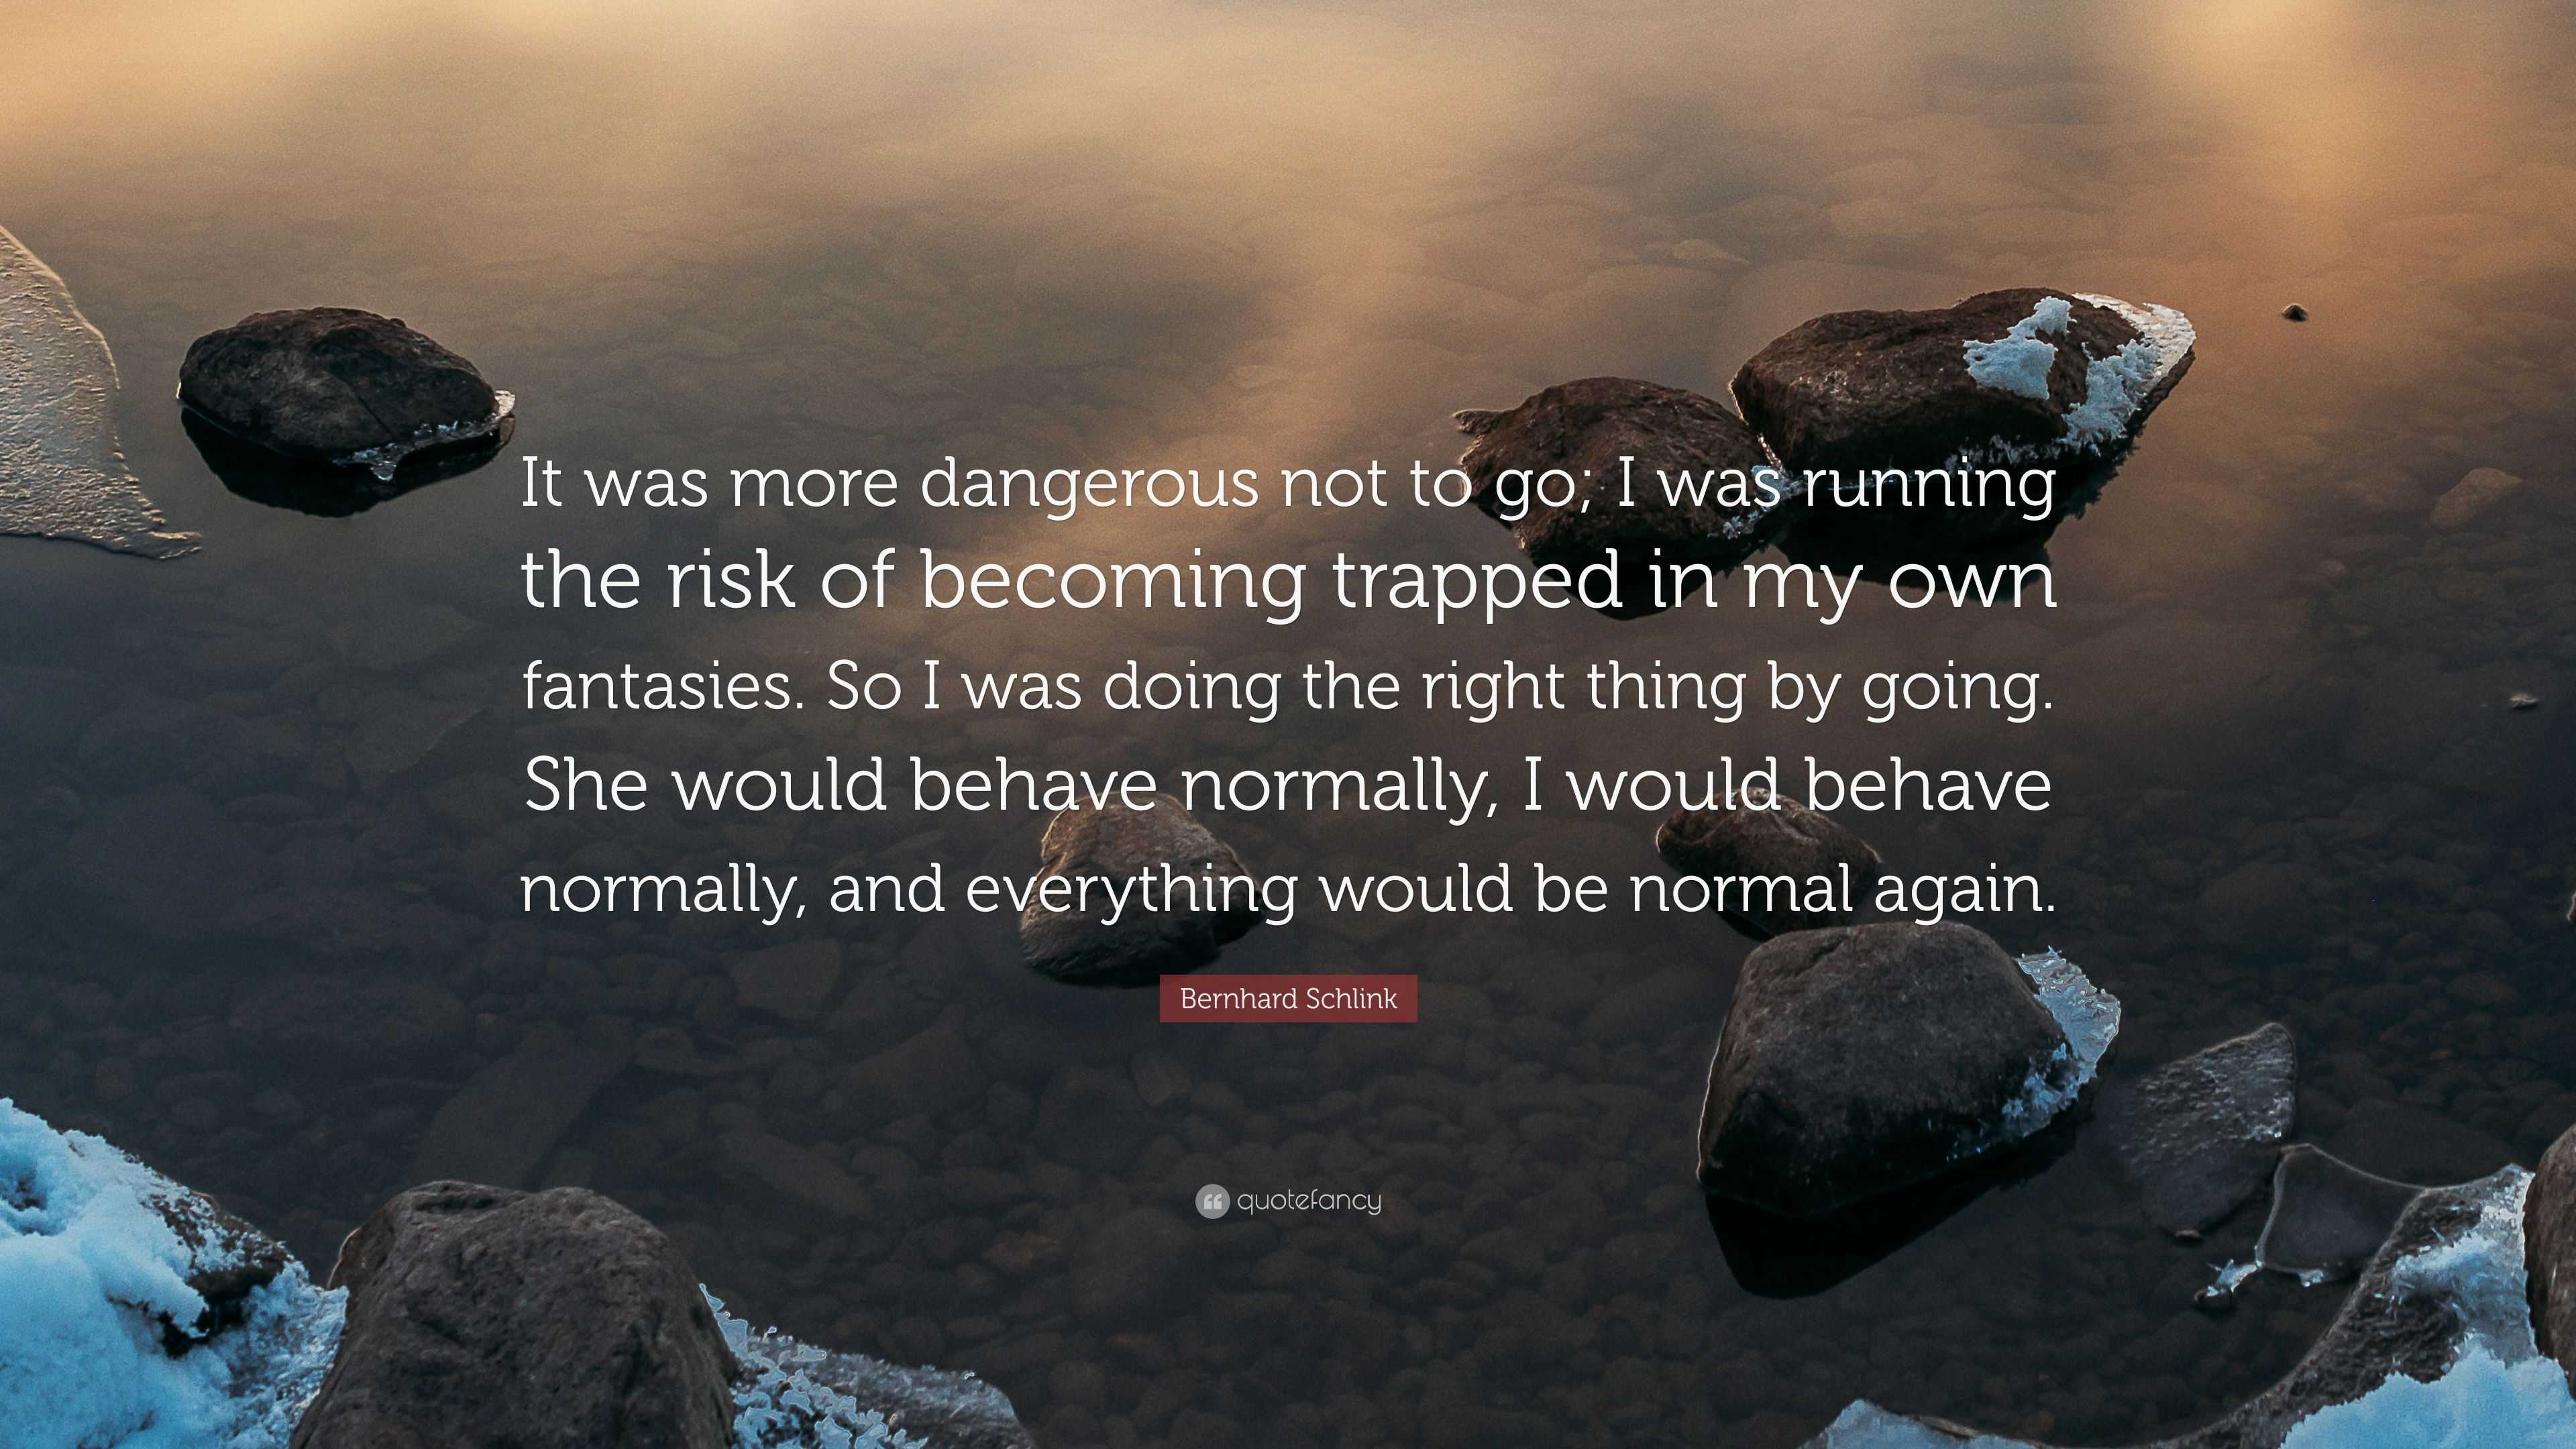 Bernhard Schlink Quote “it Was More Dangerous Not To Go I Was Running The Risk Of Becoming 9323